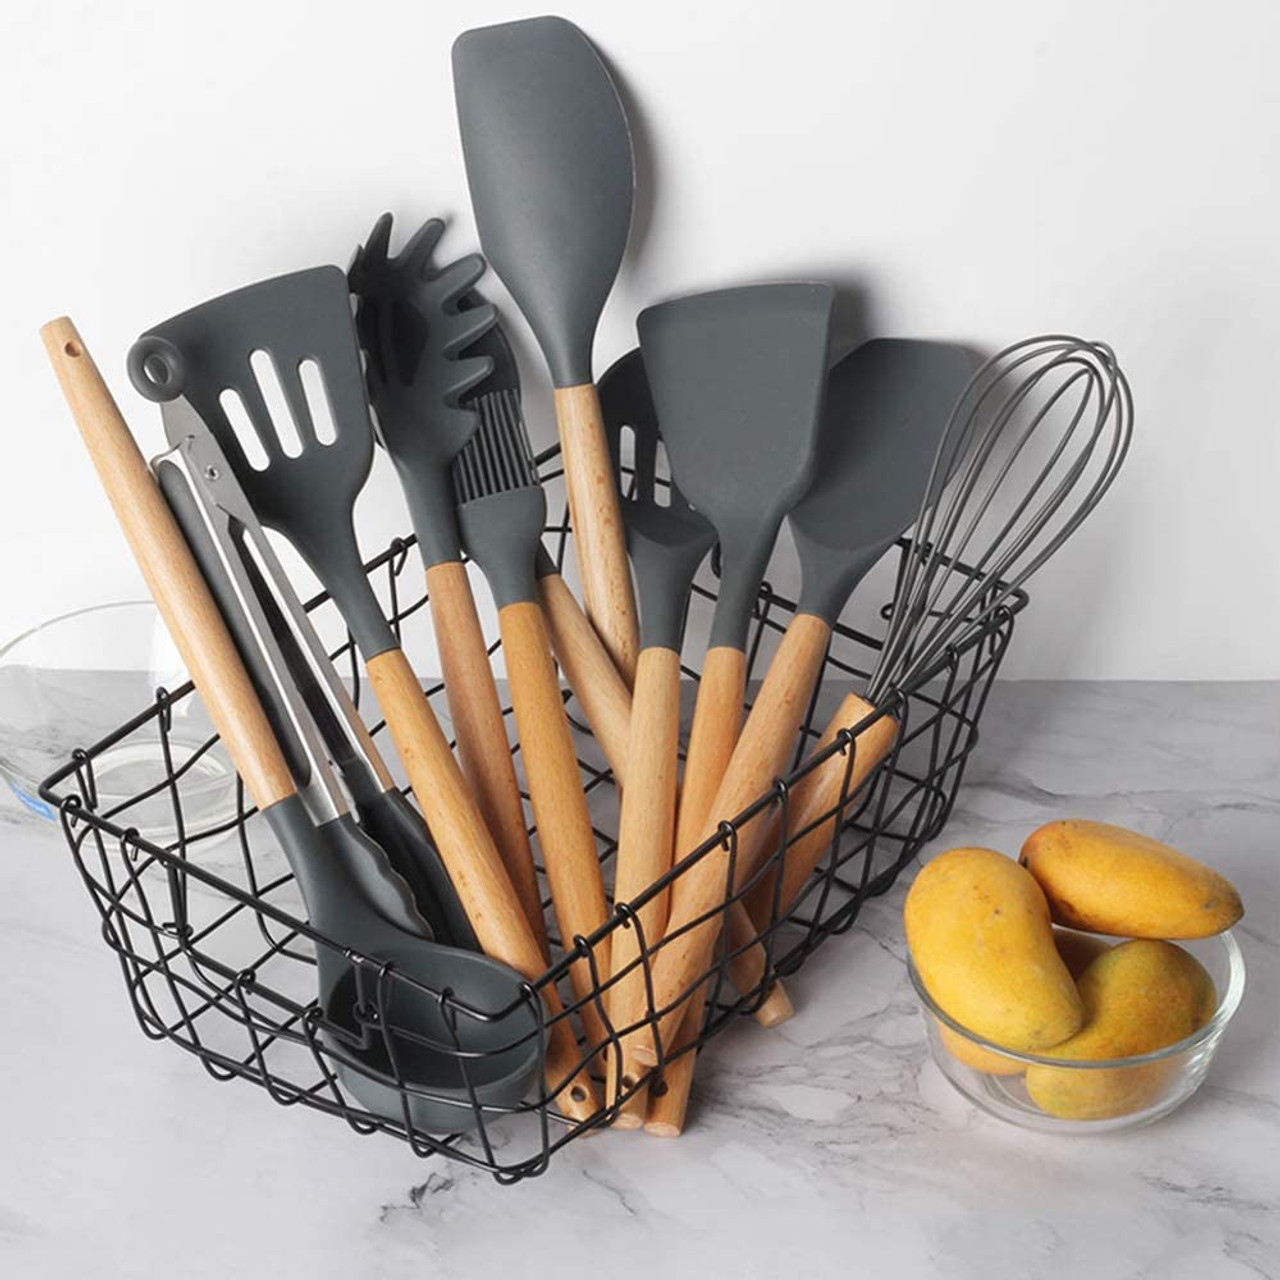 Silicone Cooking Utensils Set - 19 Pcs Kitchen South Africa